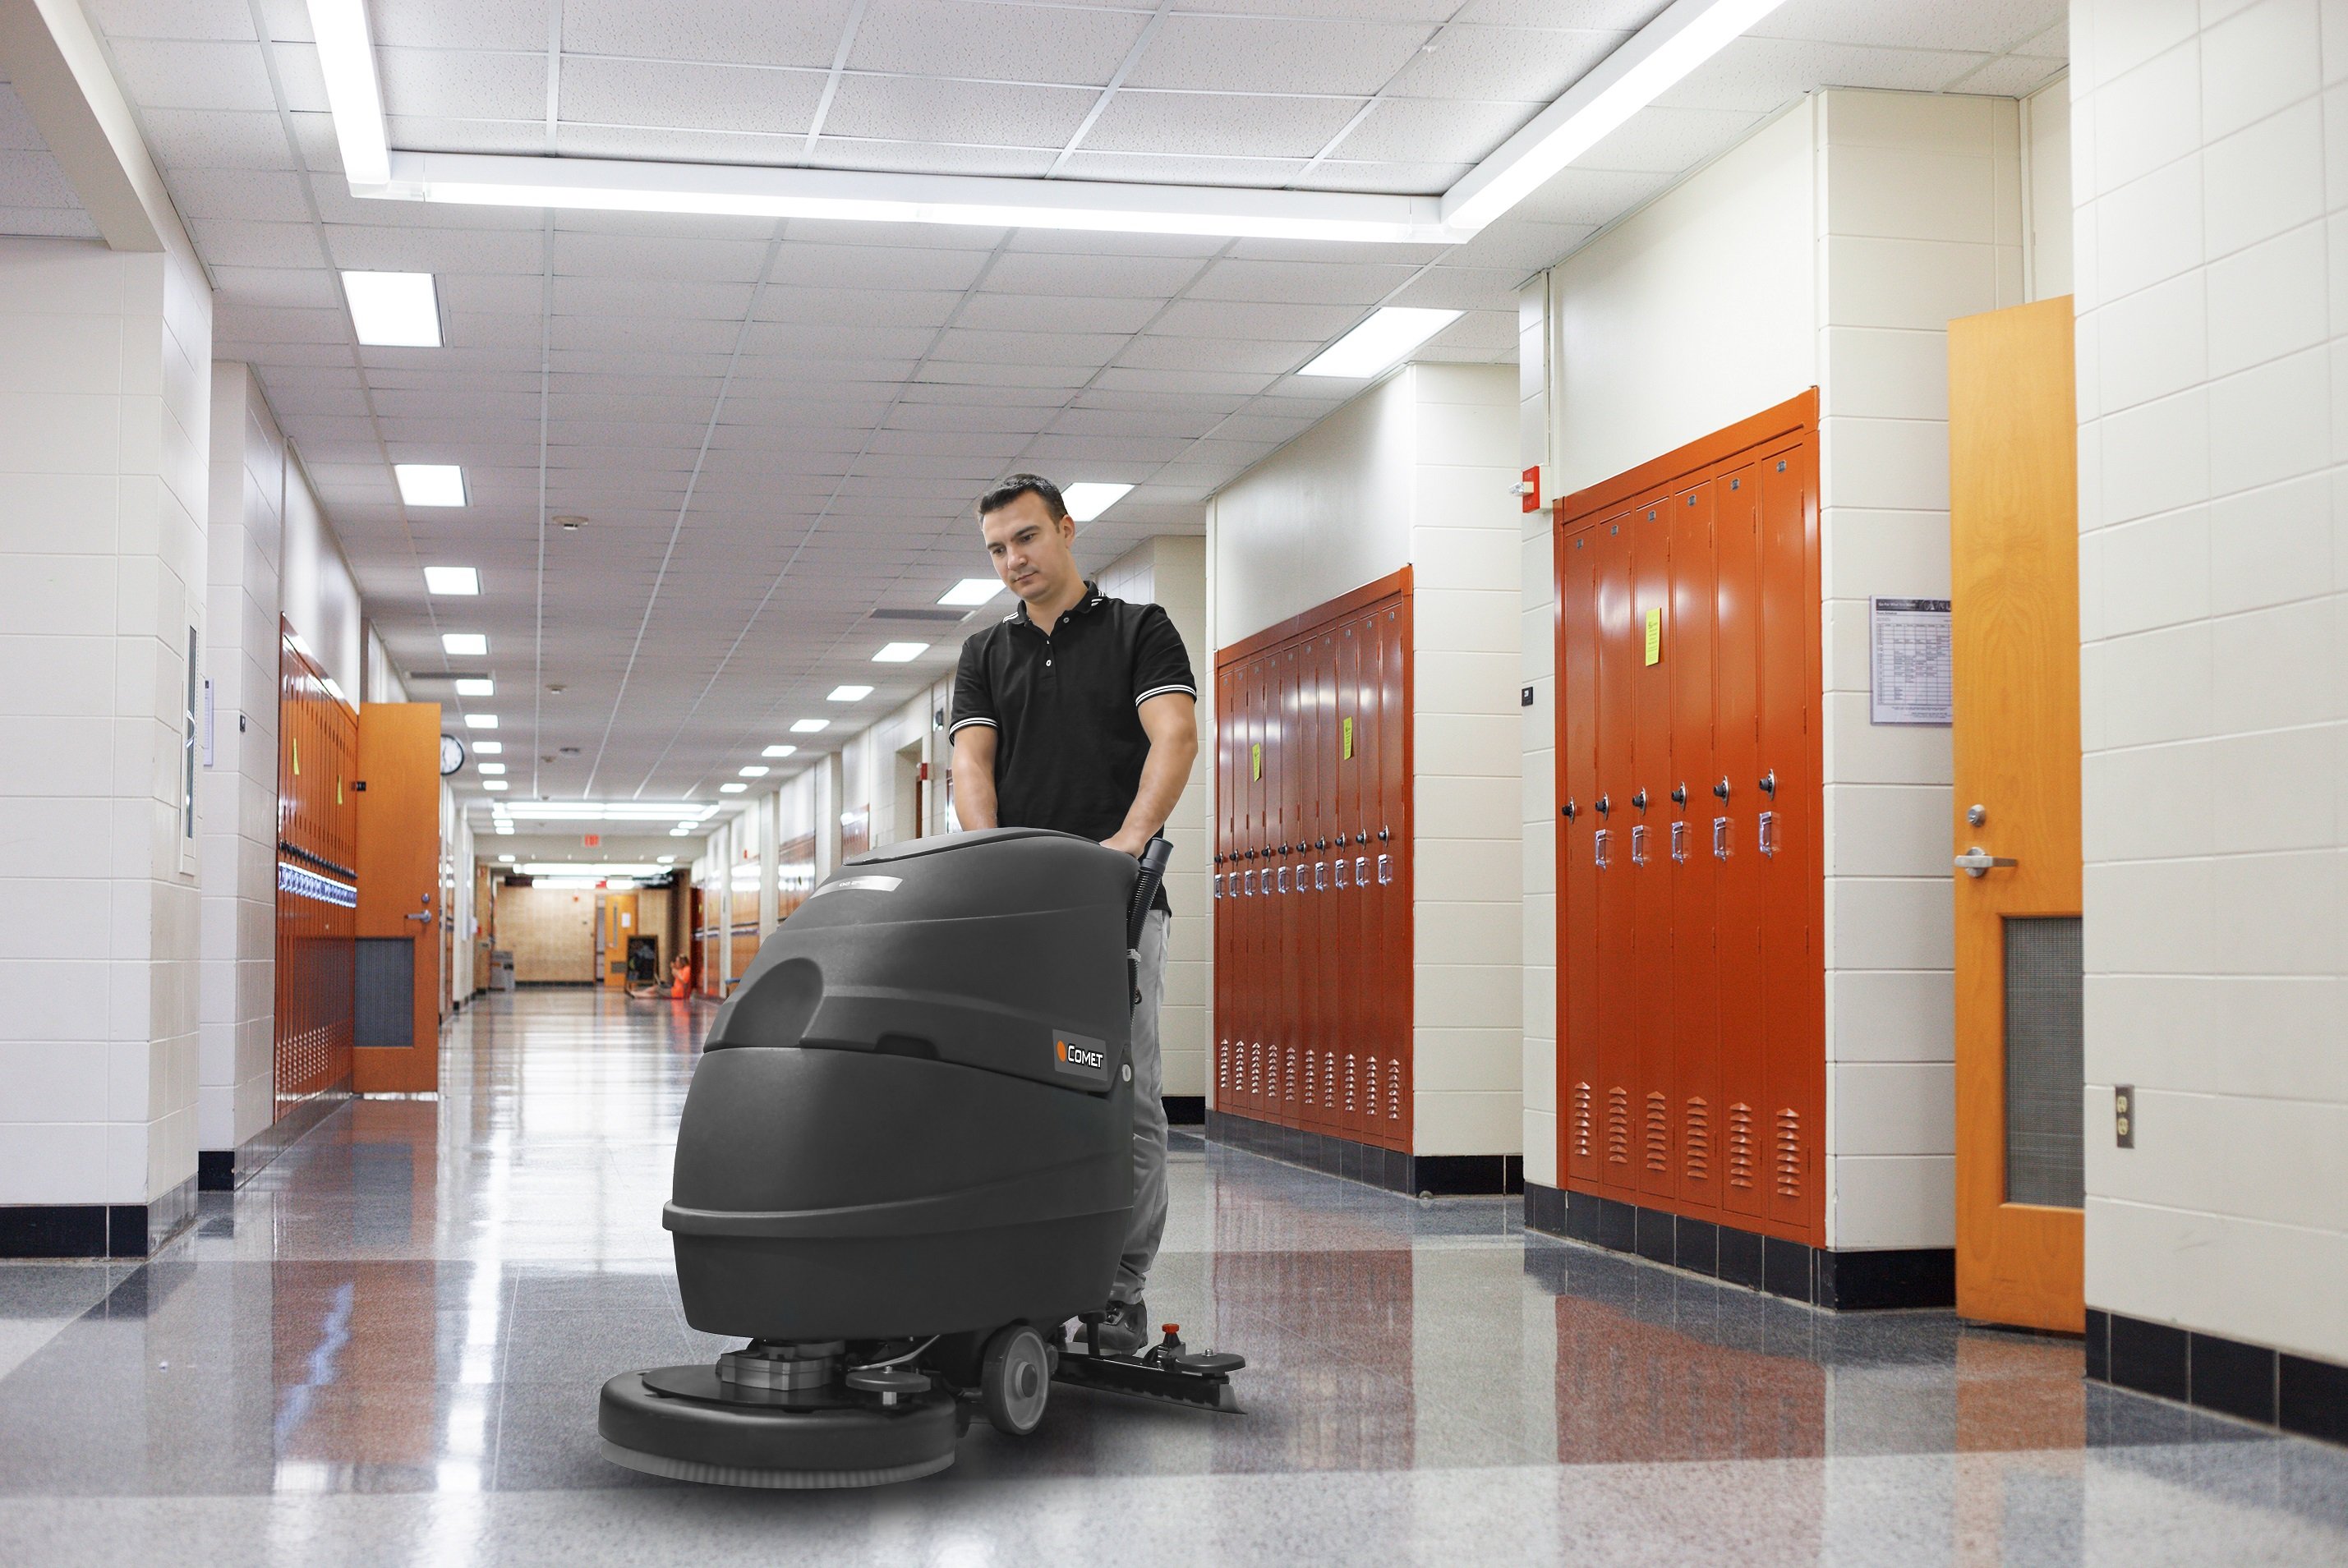 SCHOOLS: CLEANED AND SANITIZED FLOORS WITH FLOOR SCRUBBER DRYERS AND SWEEPERS